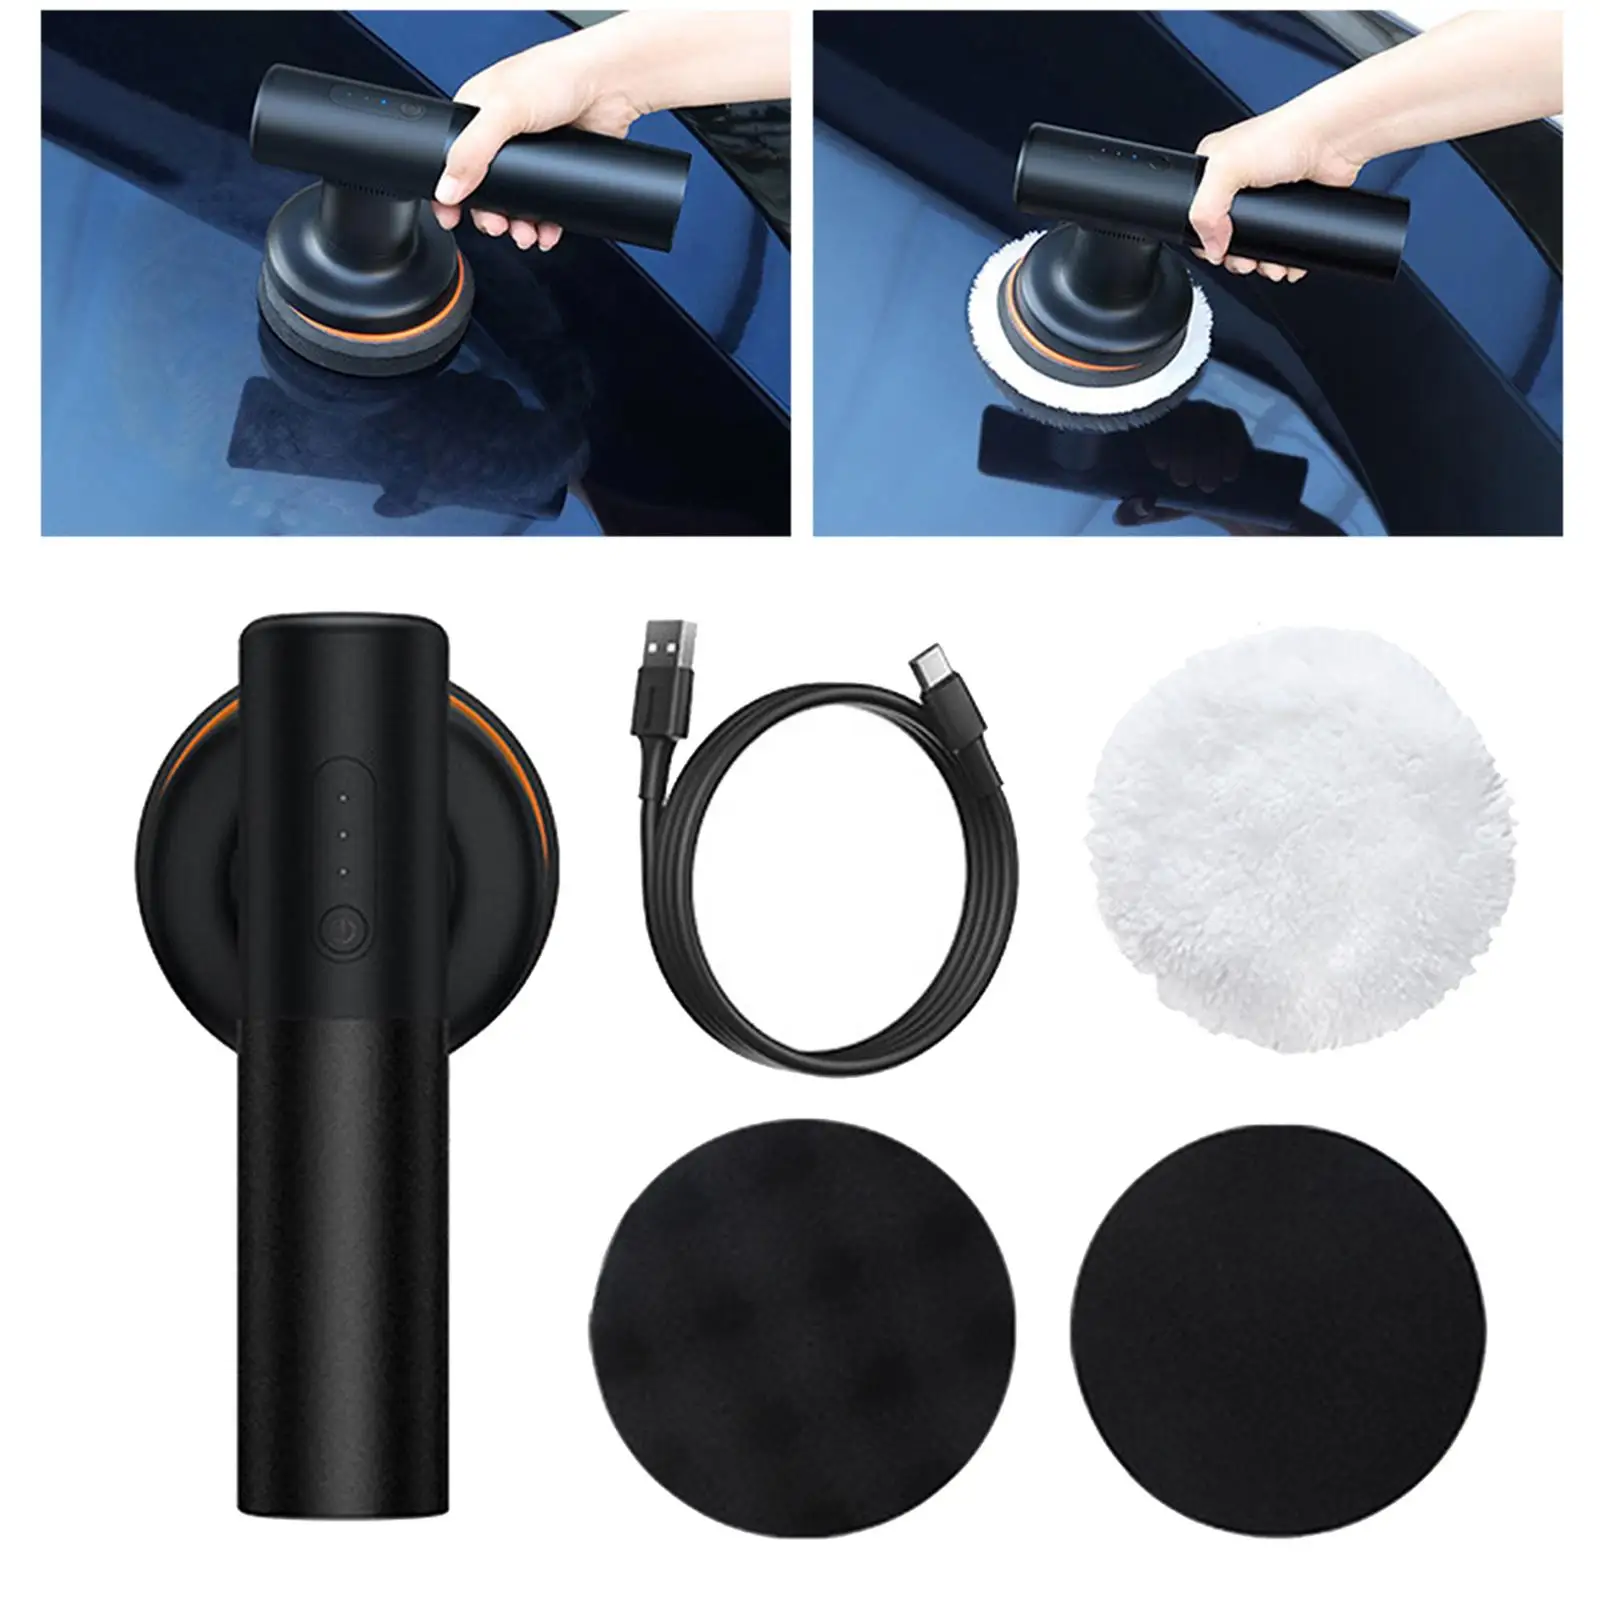  auto Polisher W/ Pad Rechargeable Portable  Start Polishing  45 Polisher Fit for Waxing Machine Sander